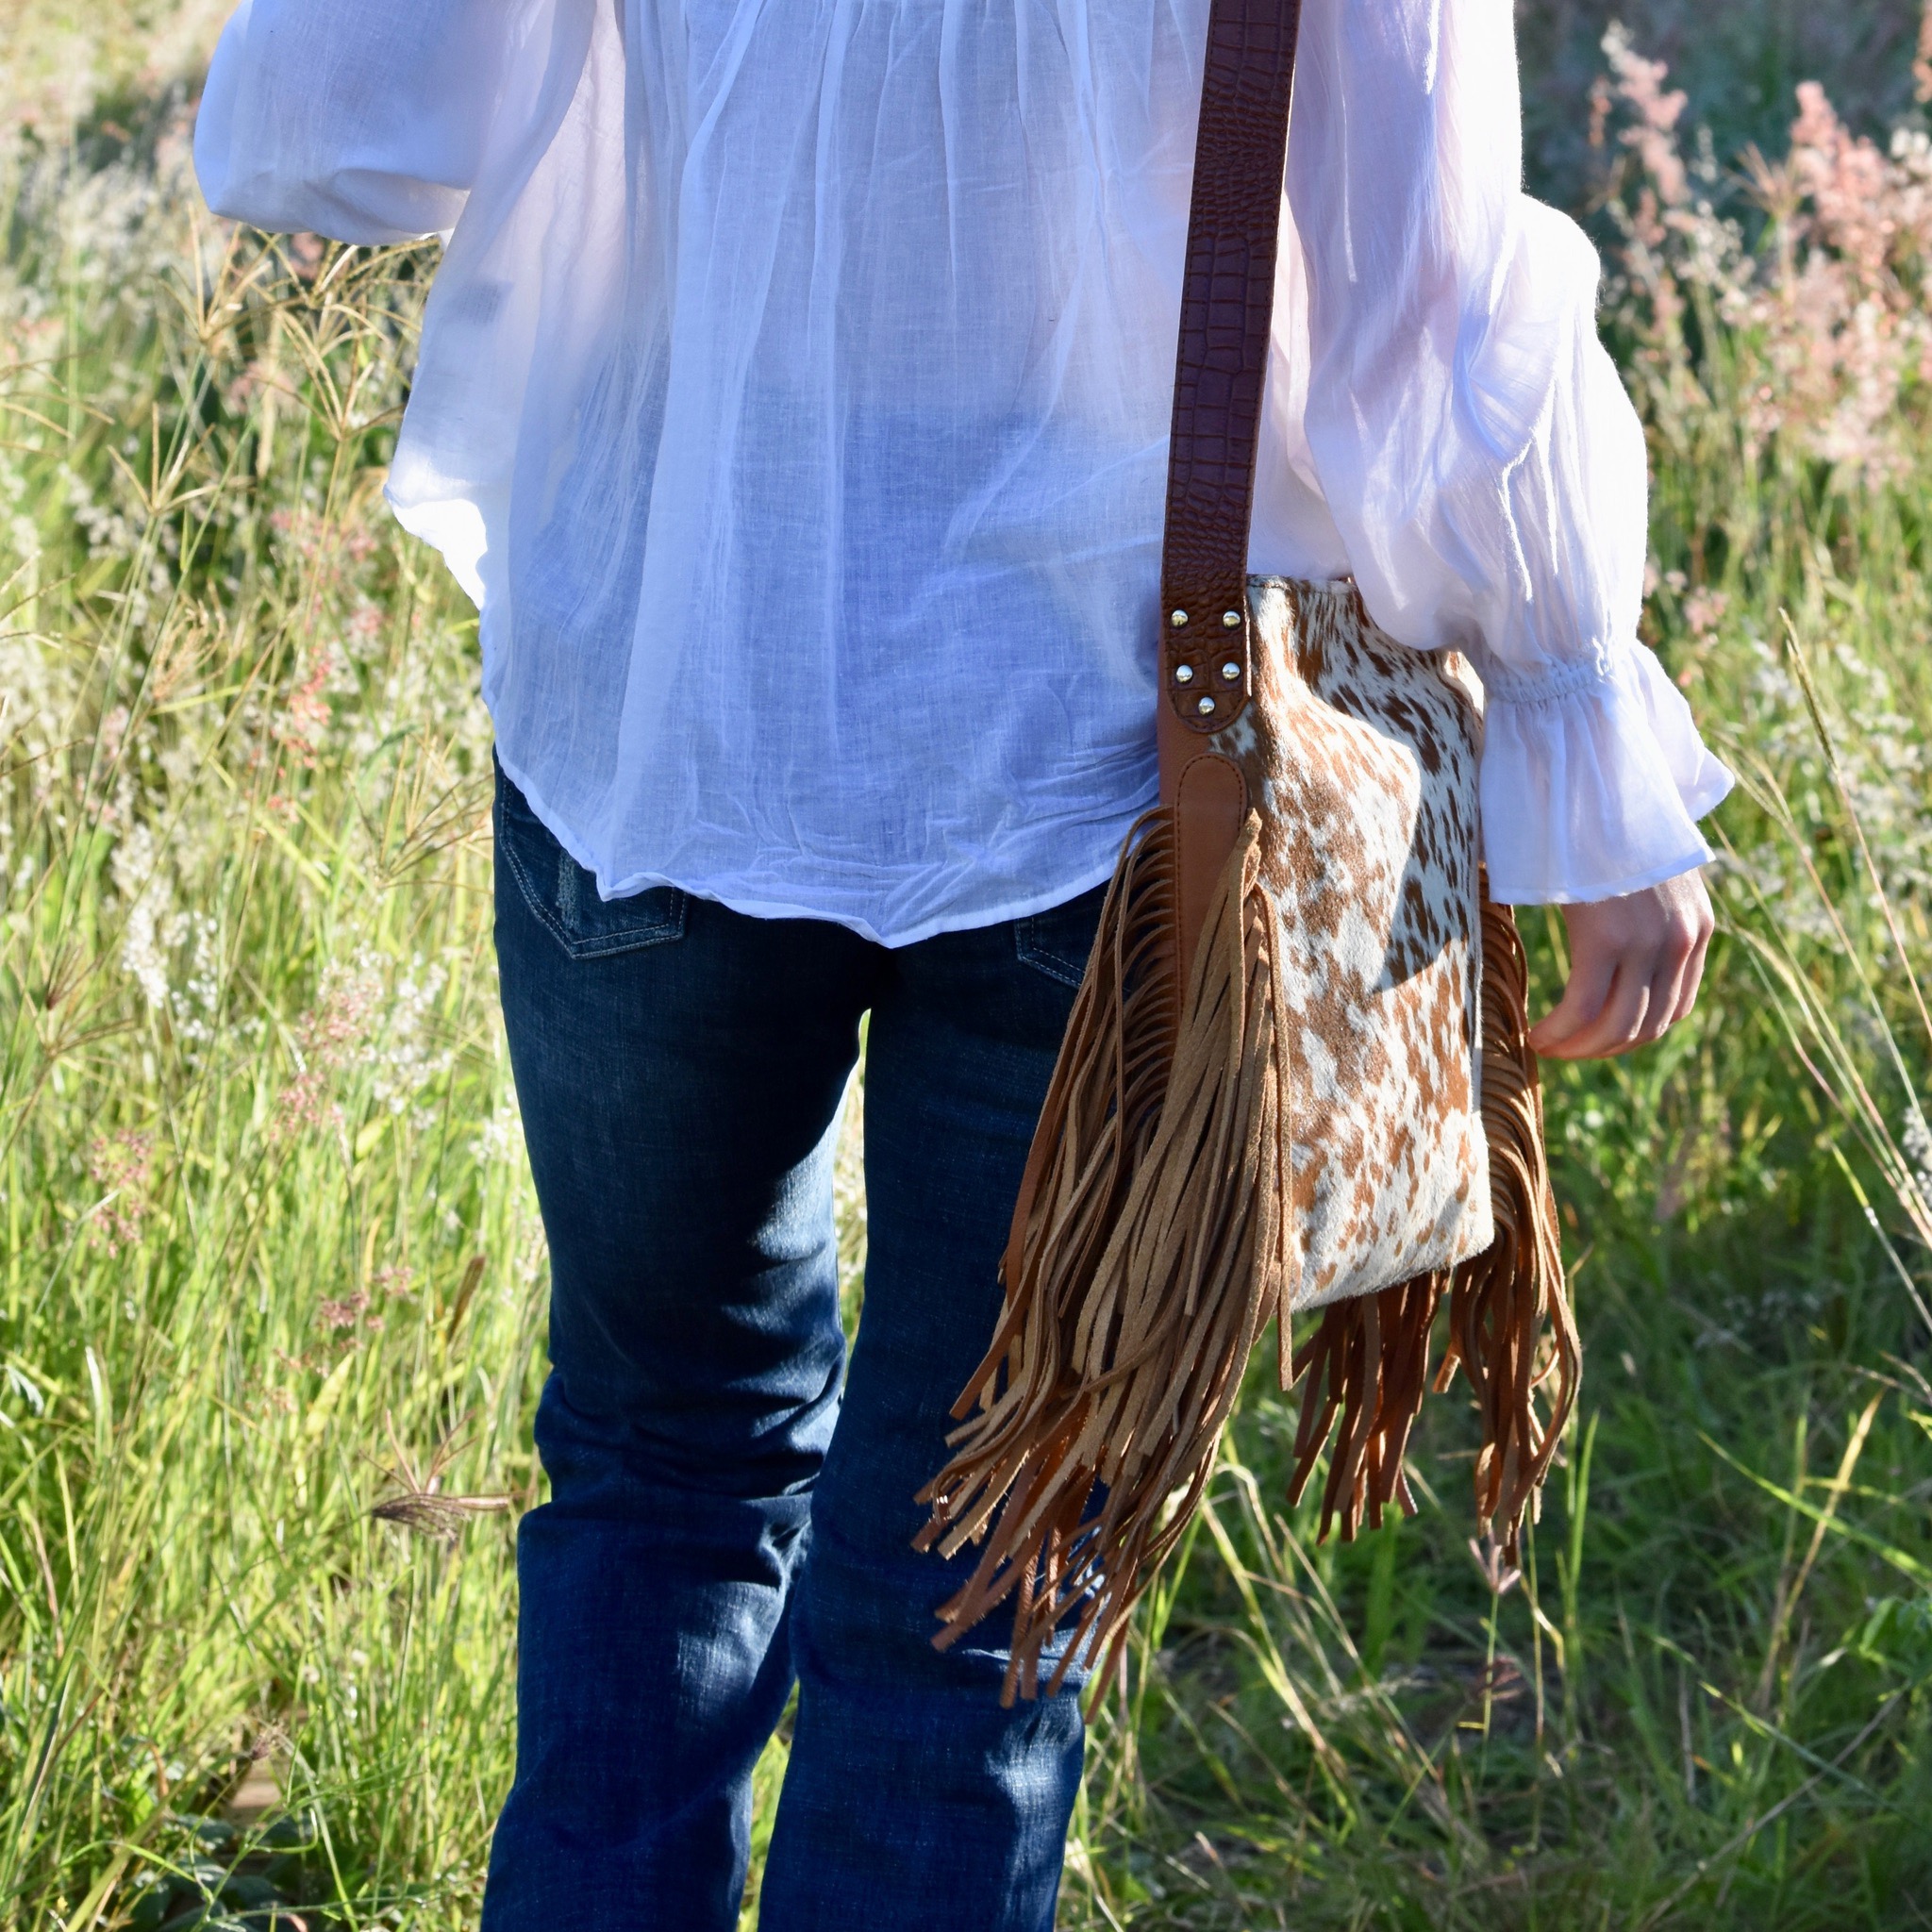 Offer Airco Absoluut Essential Cowhide Bags & Accessories • Sunday Cowgirl